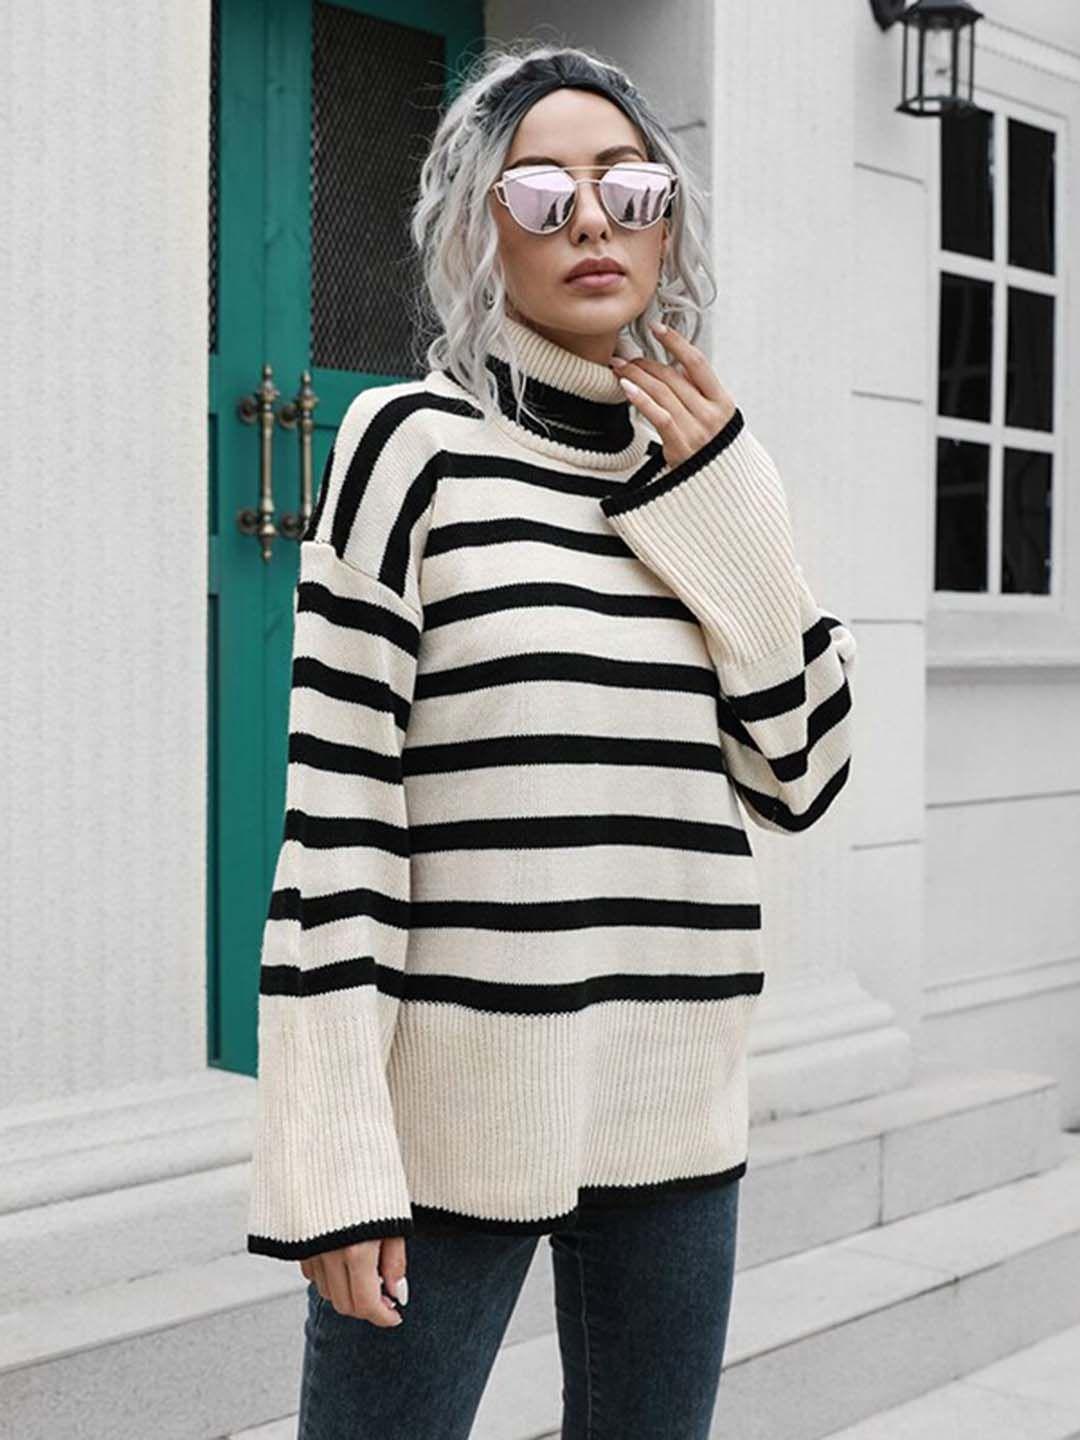 stylecast beige striped turtle neck long sleeves acrylic pullover sweater